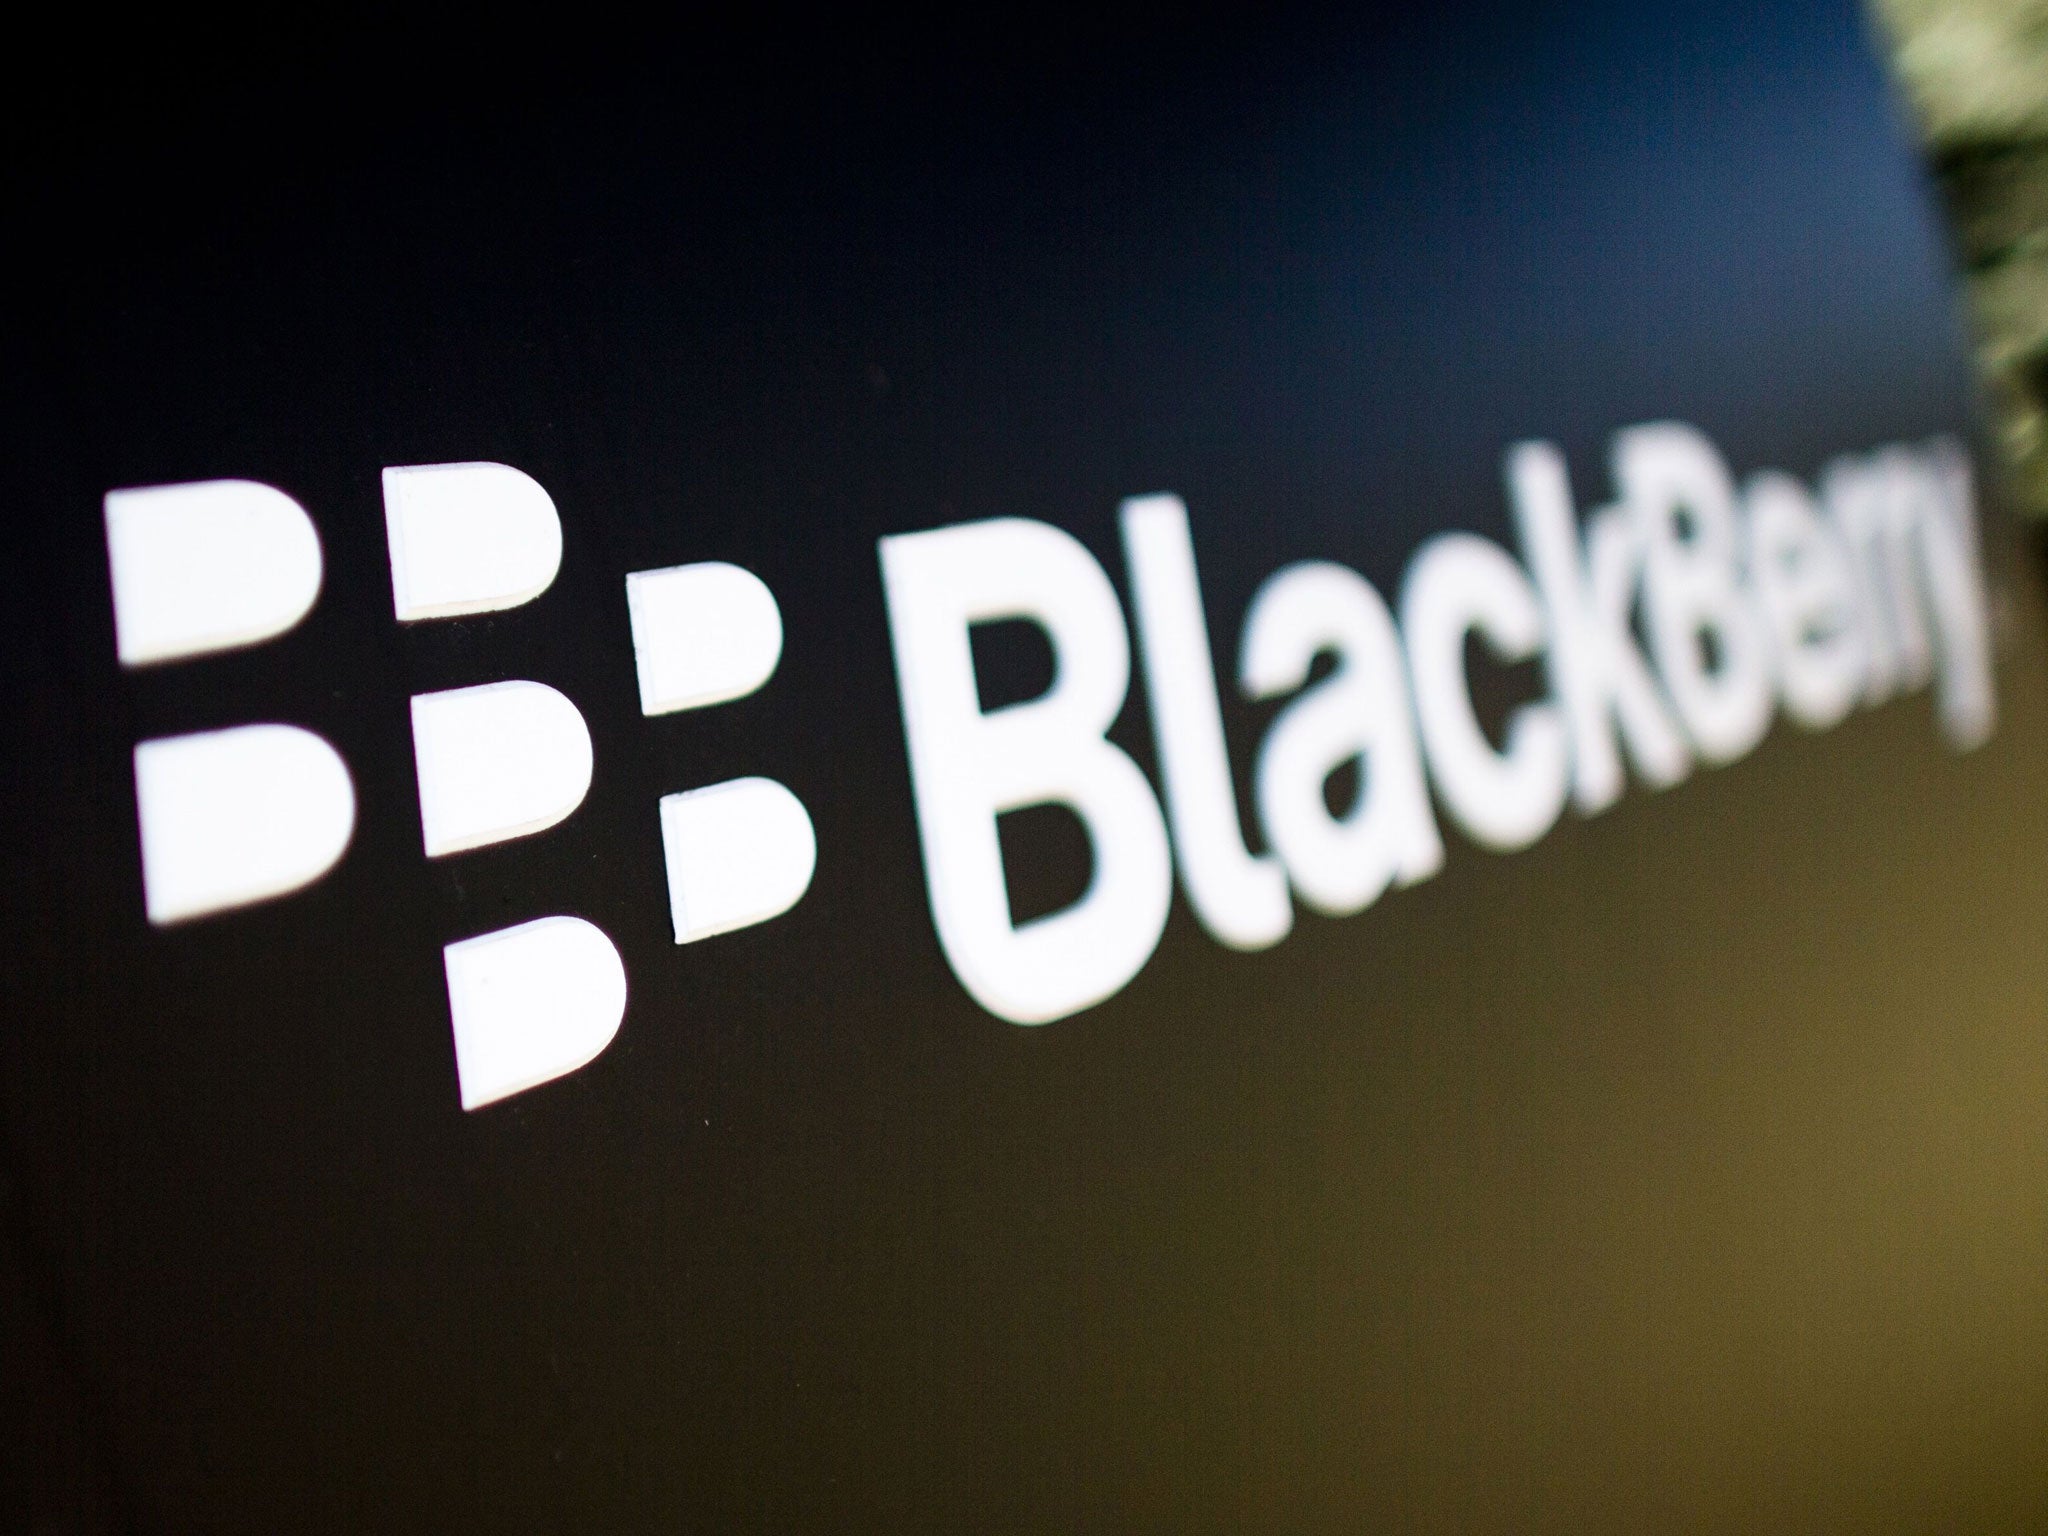 BlackBerry has turned to Chinese manufacturer Foxconn to produce its hardware